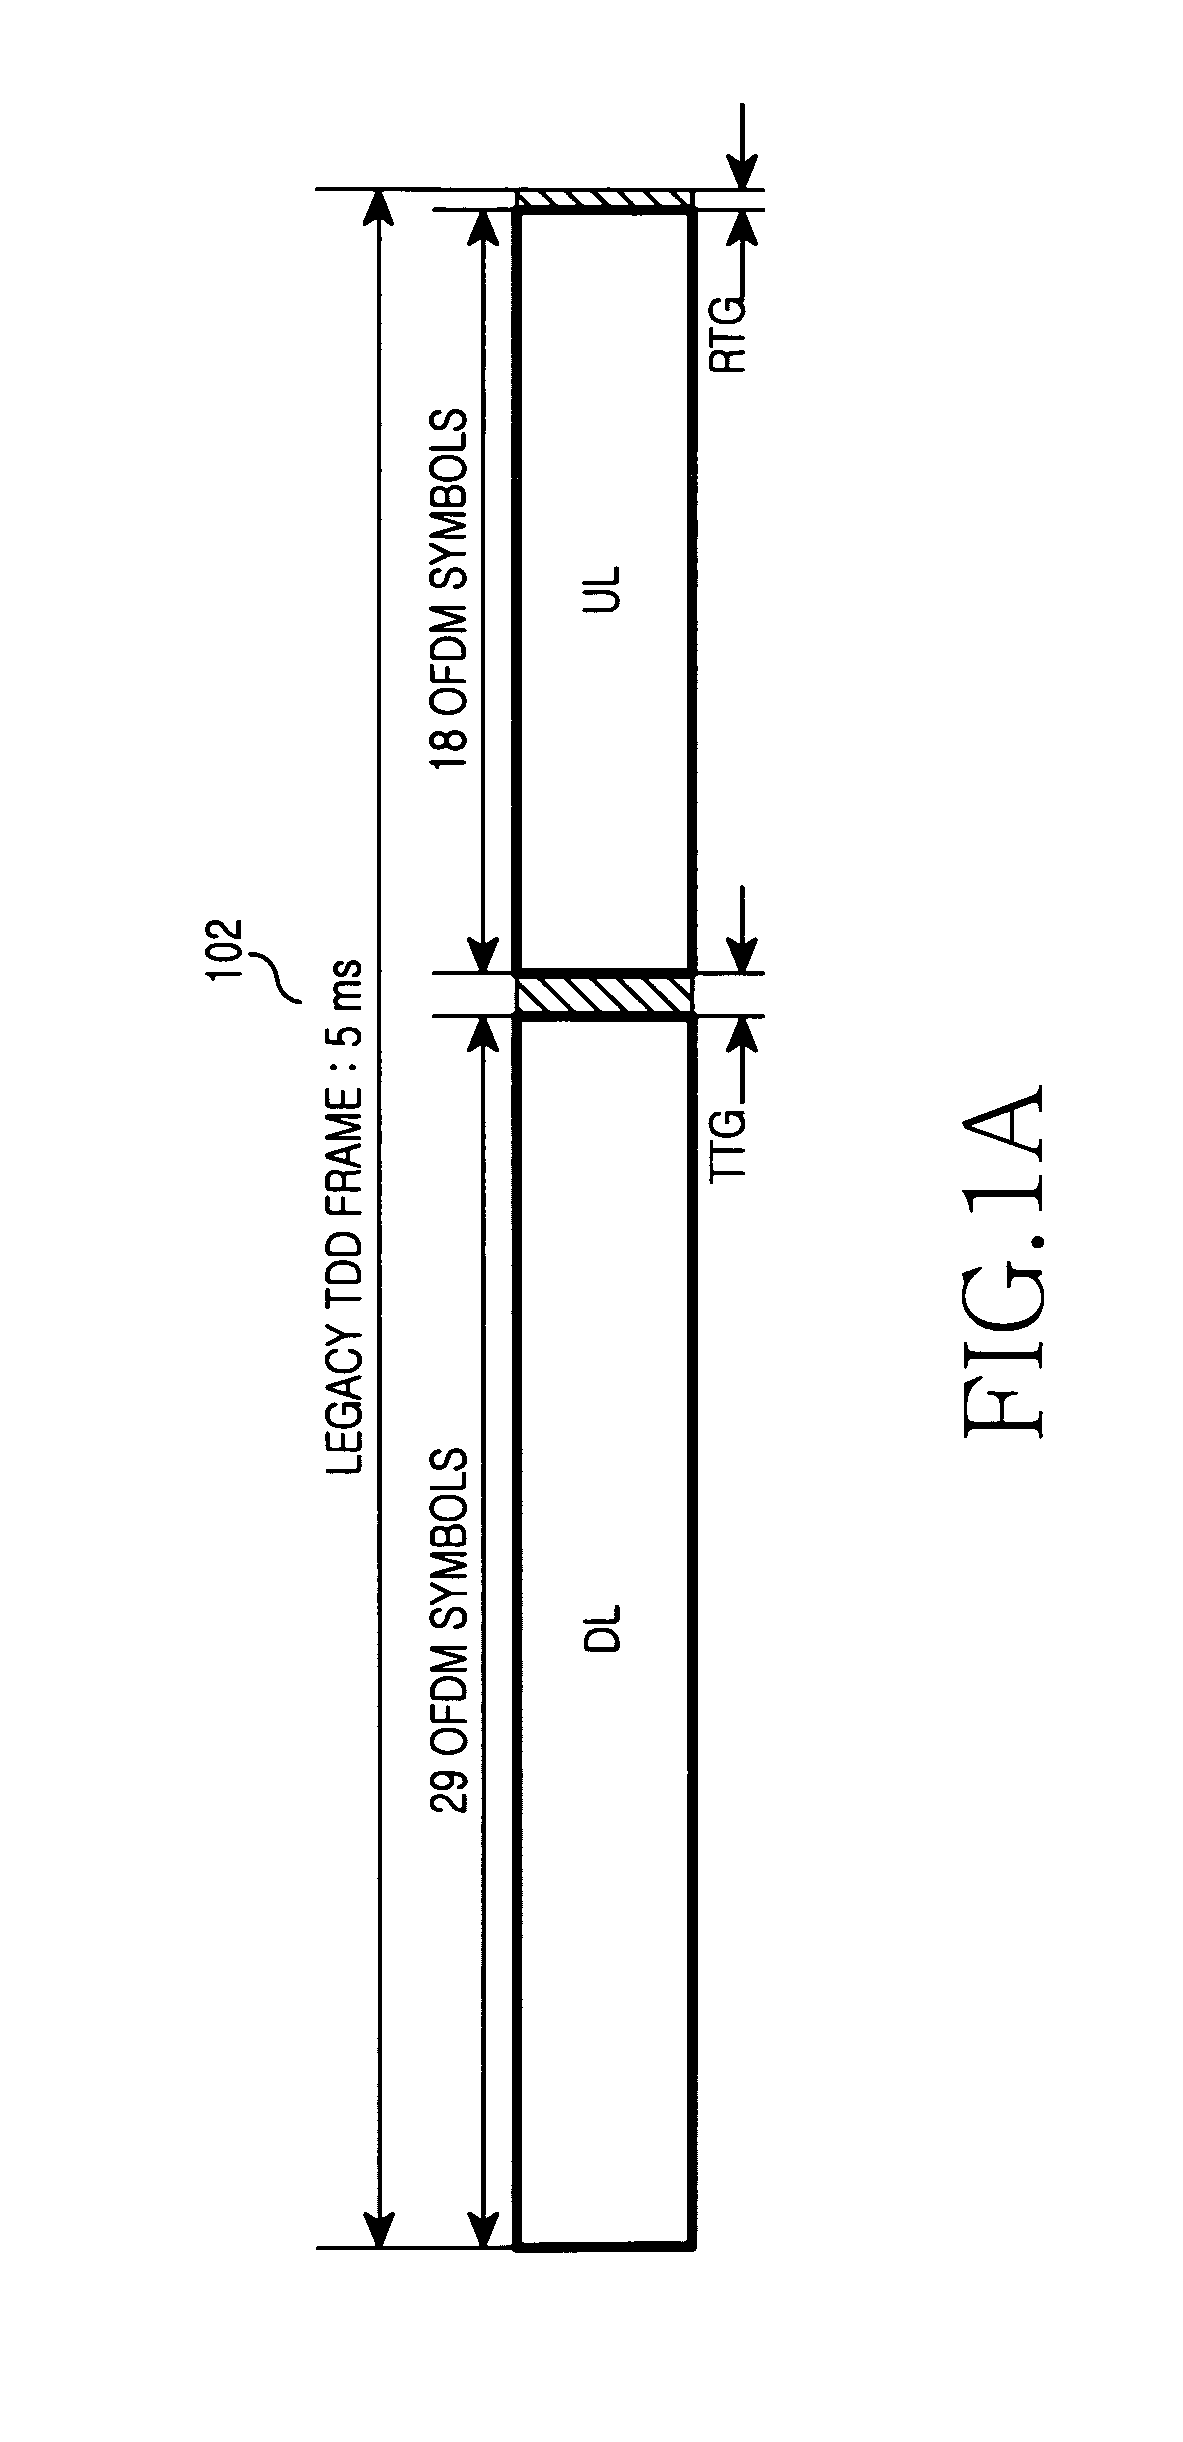 Method for handoff during connected mode of a multimode mobile station in a mixed deployment